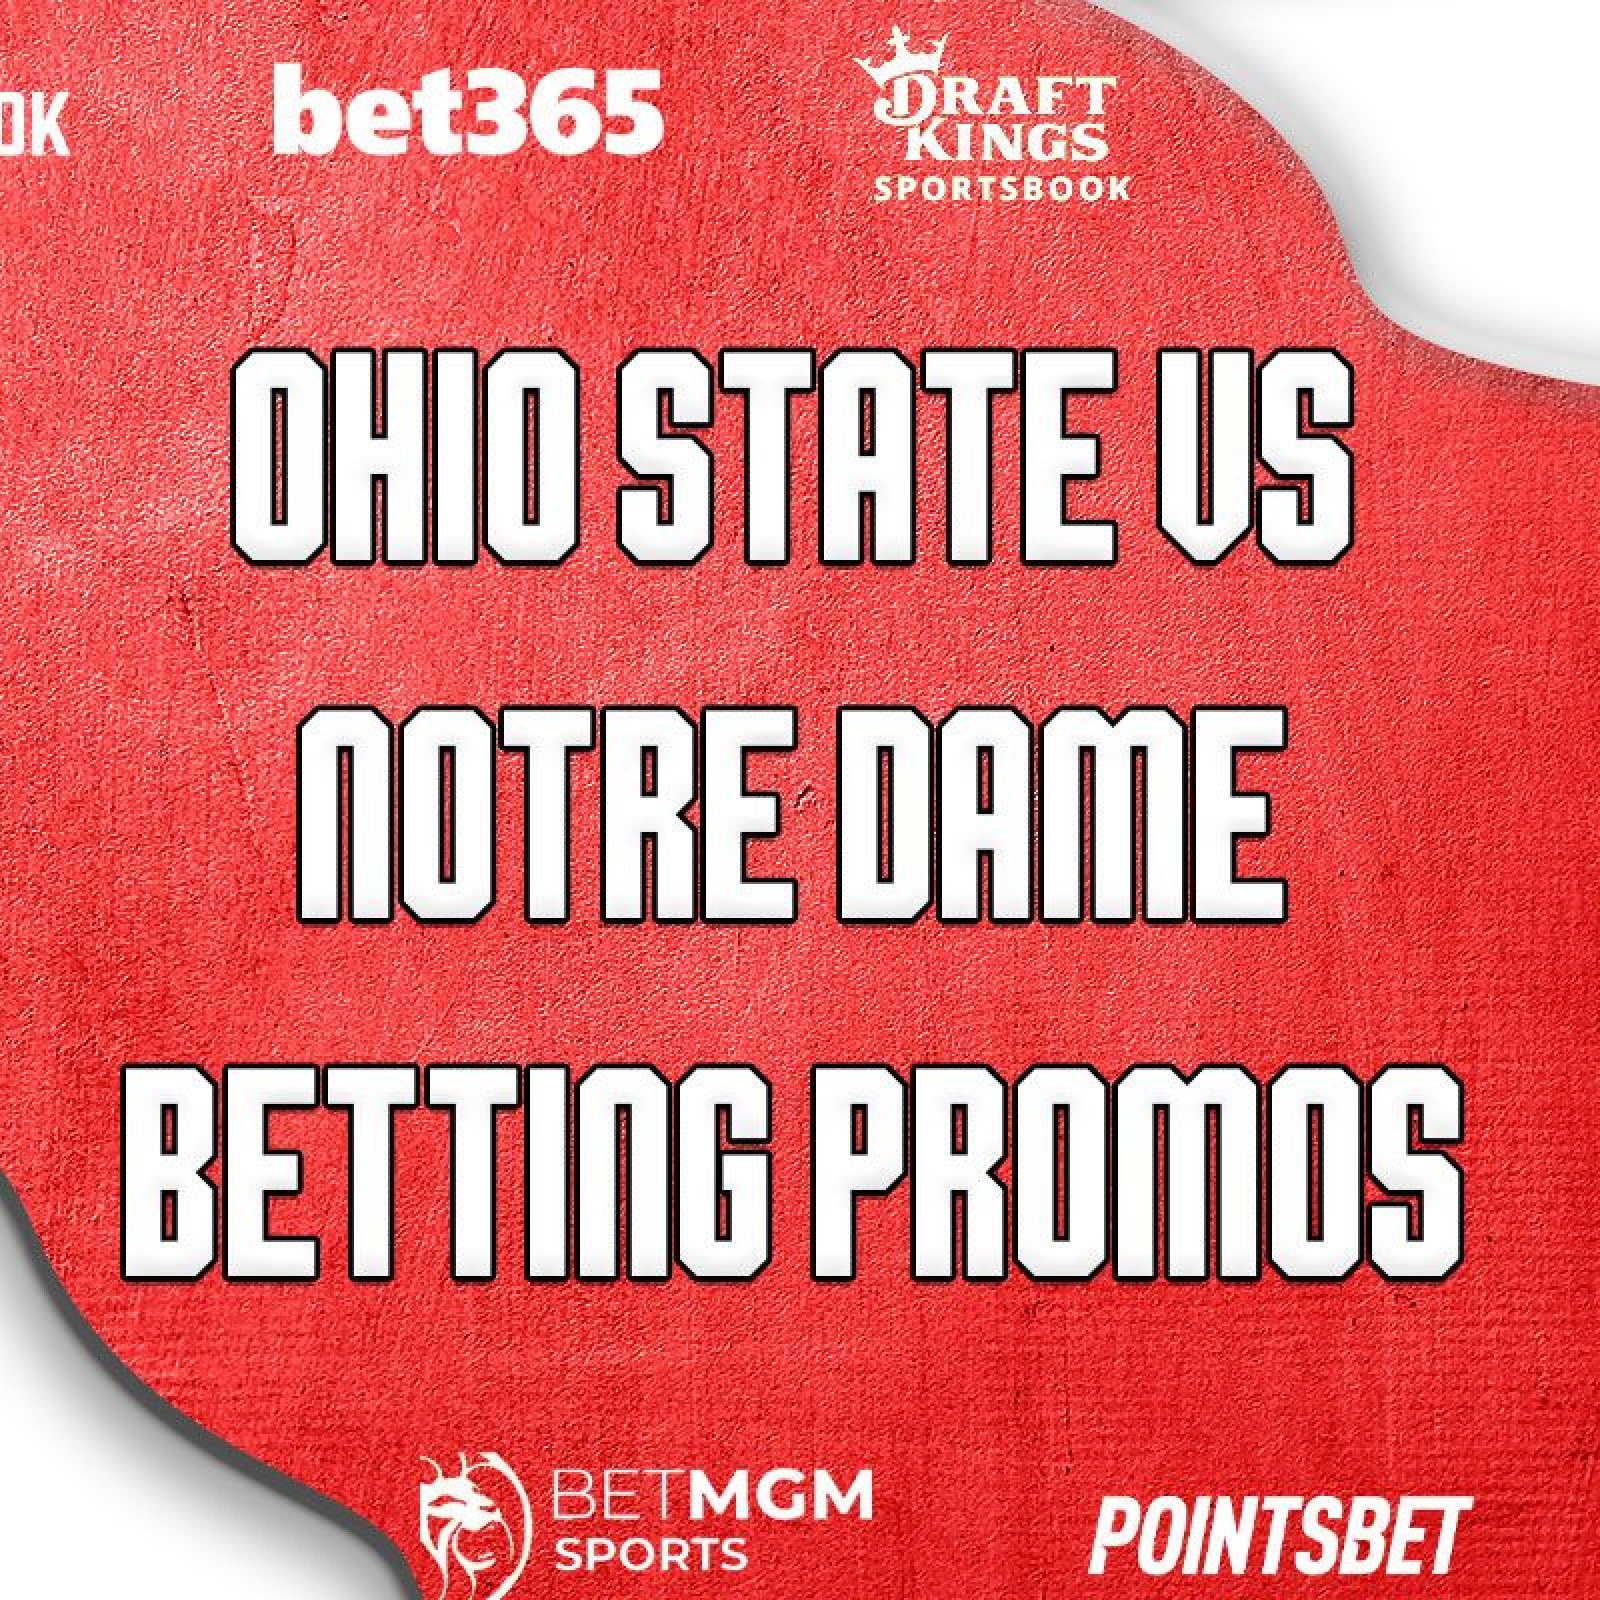 Ohio sports betting promos: 4 best offers for NFL wild card weekend 